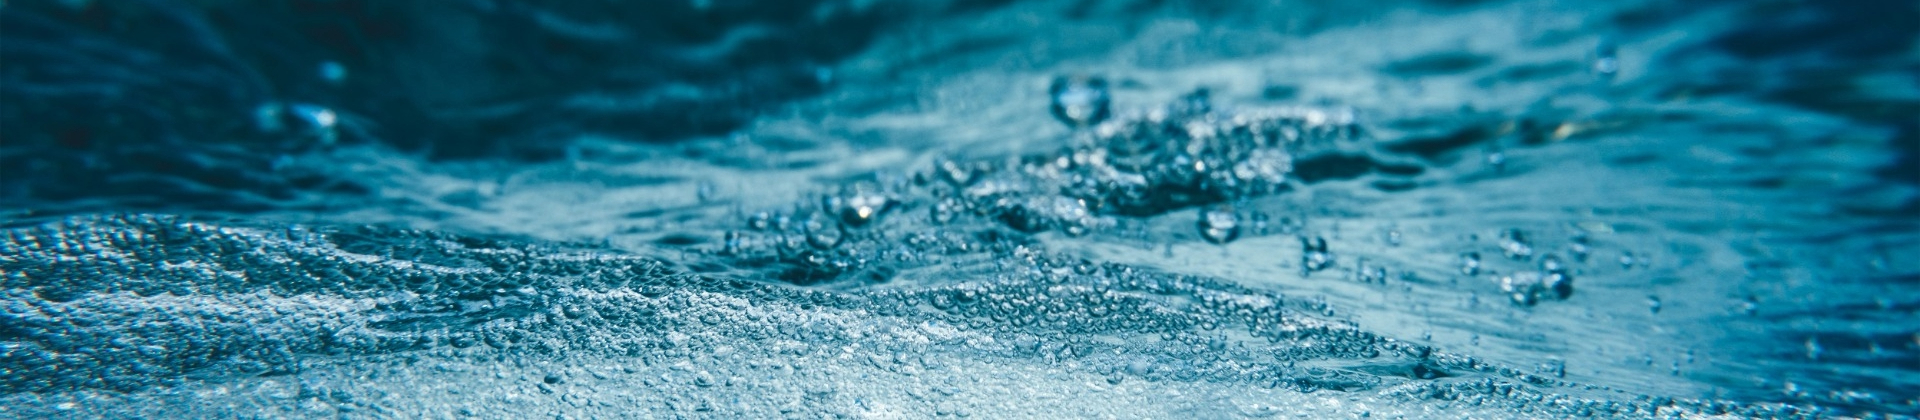 Blue water with droplets